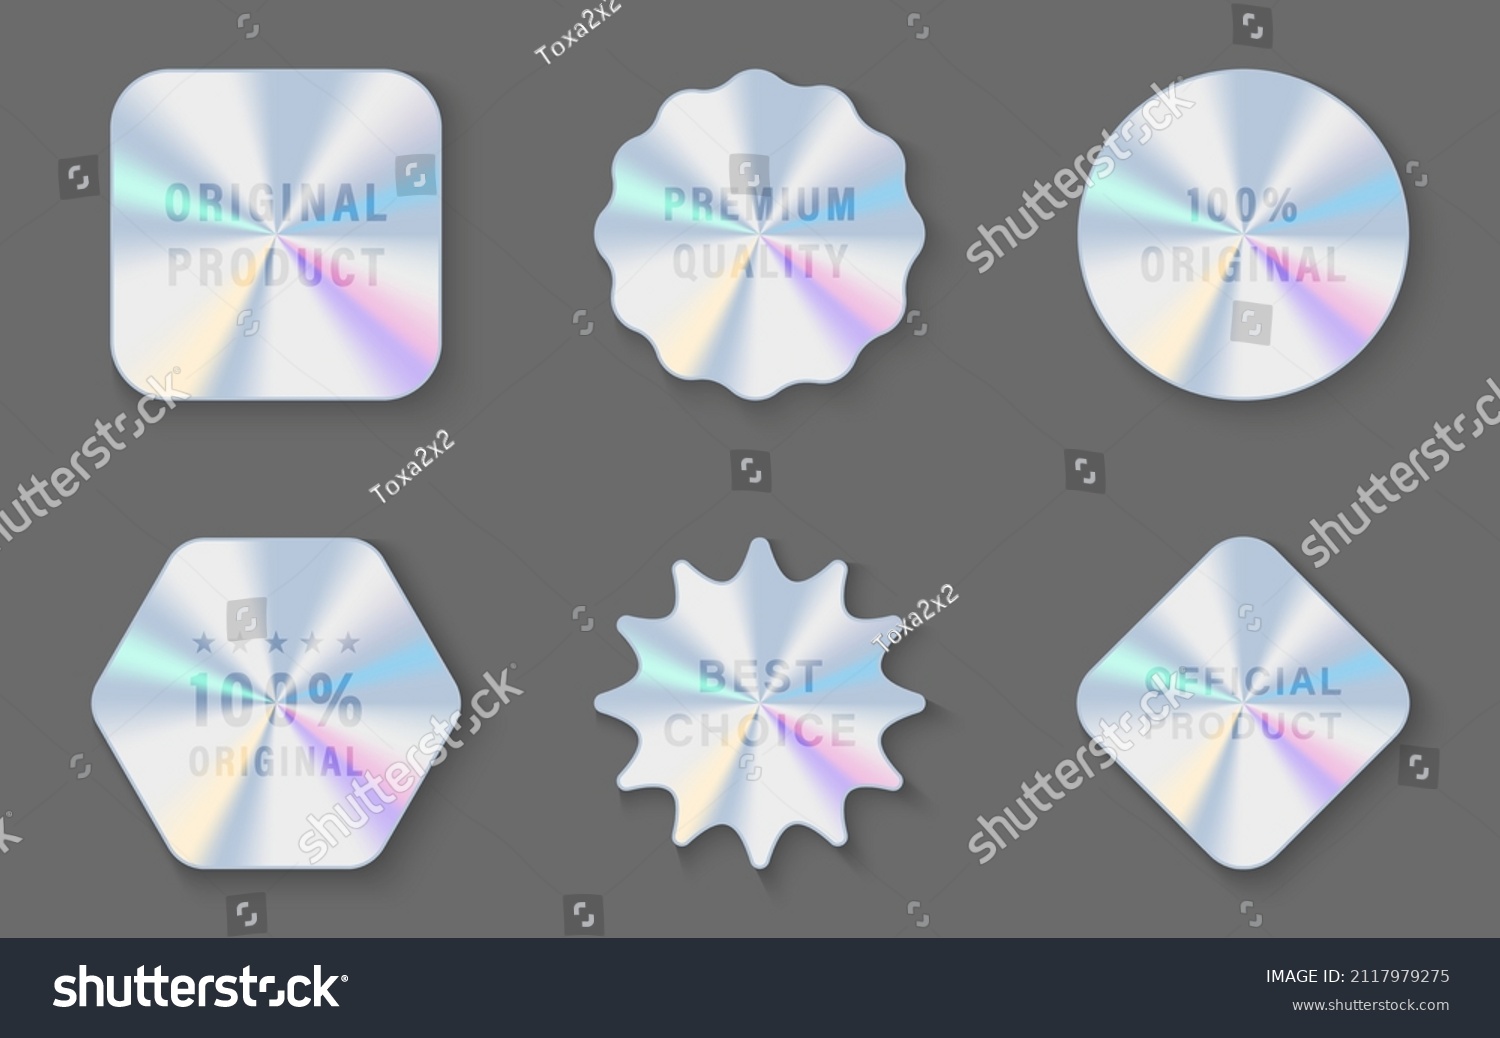 Hologram Stickers in Geometric Shapes Pictogram. Premium Quality, Best Choice, Original, Official Product Holographic Label. Holography Gradient Seal Template. Isolated Vector Illustration #2117979275